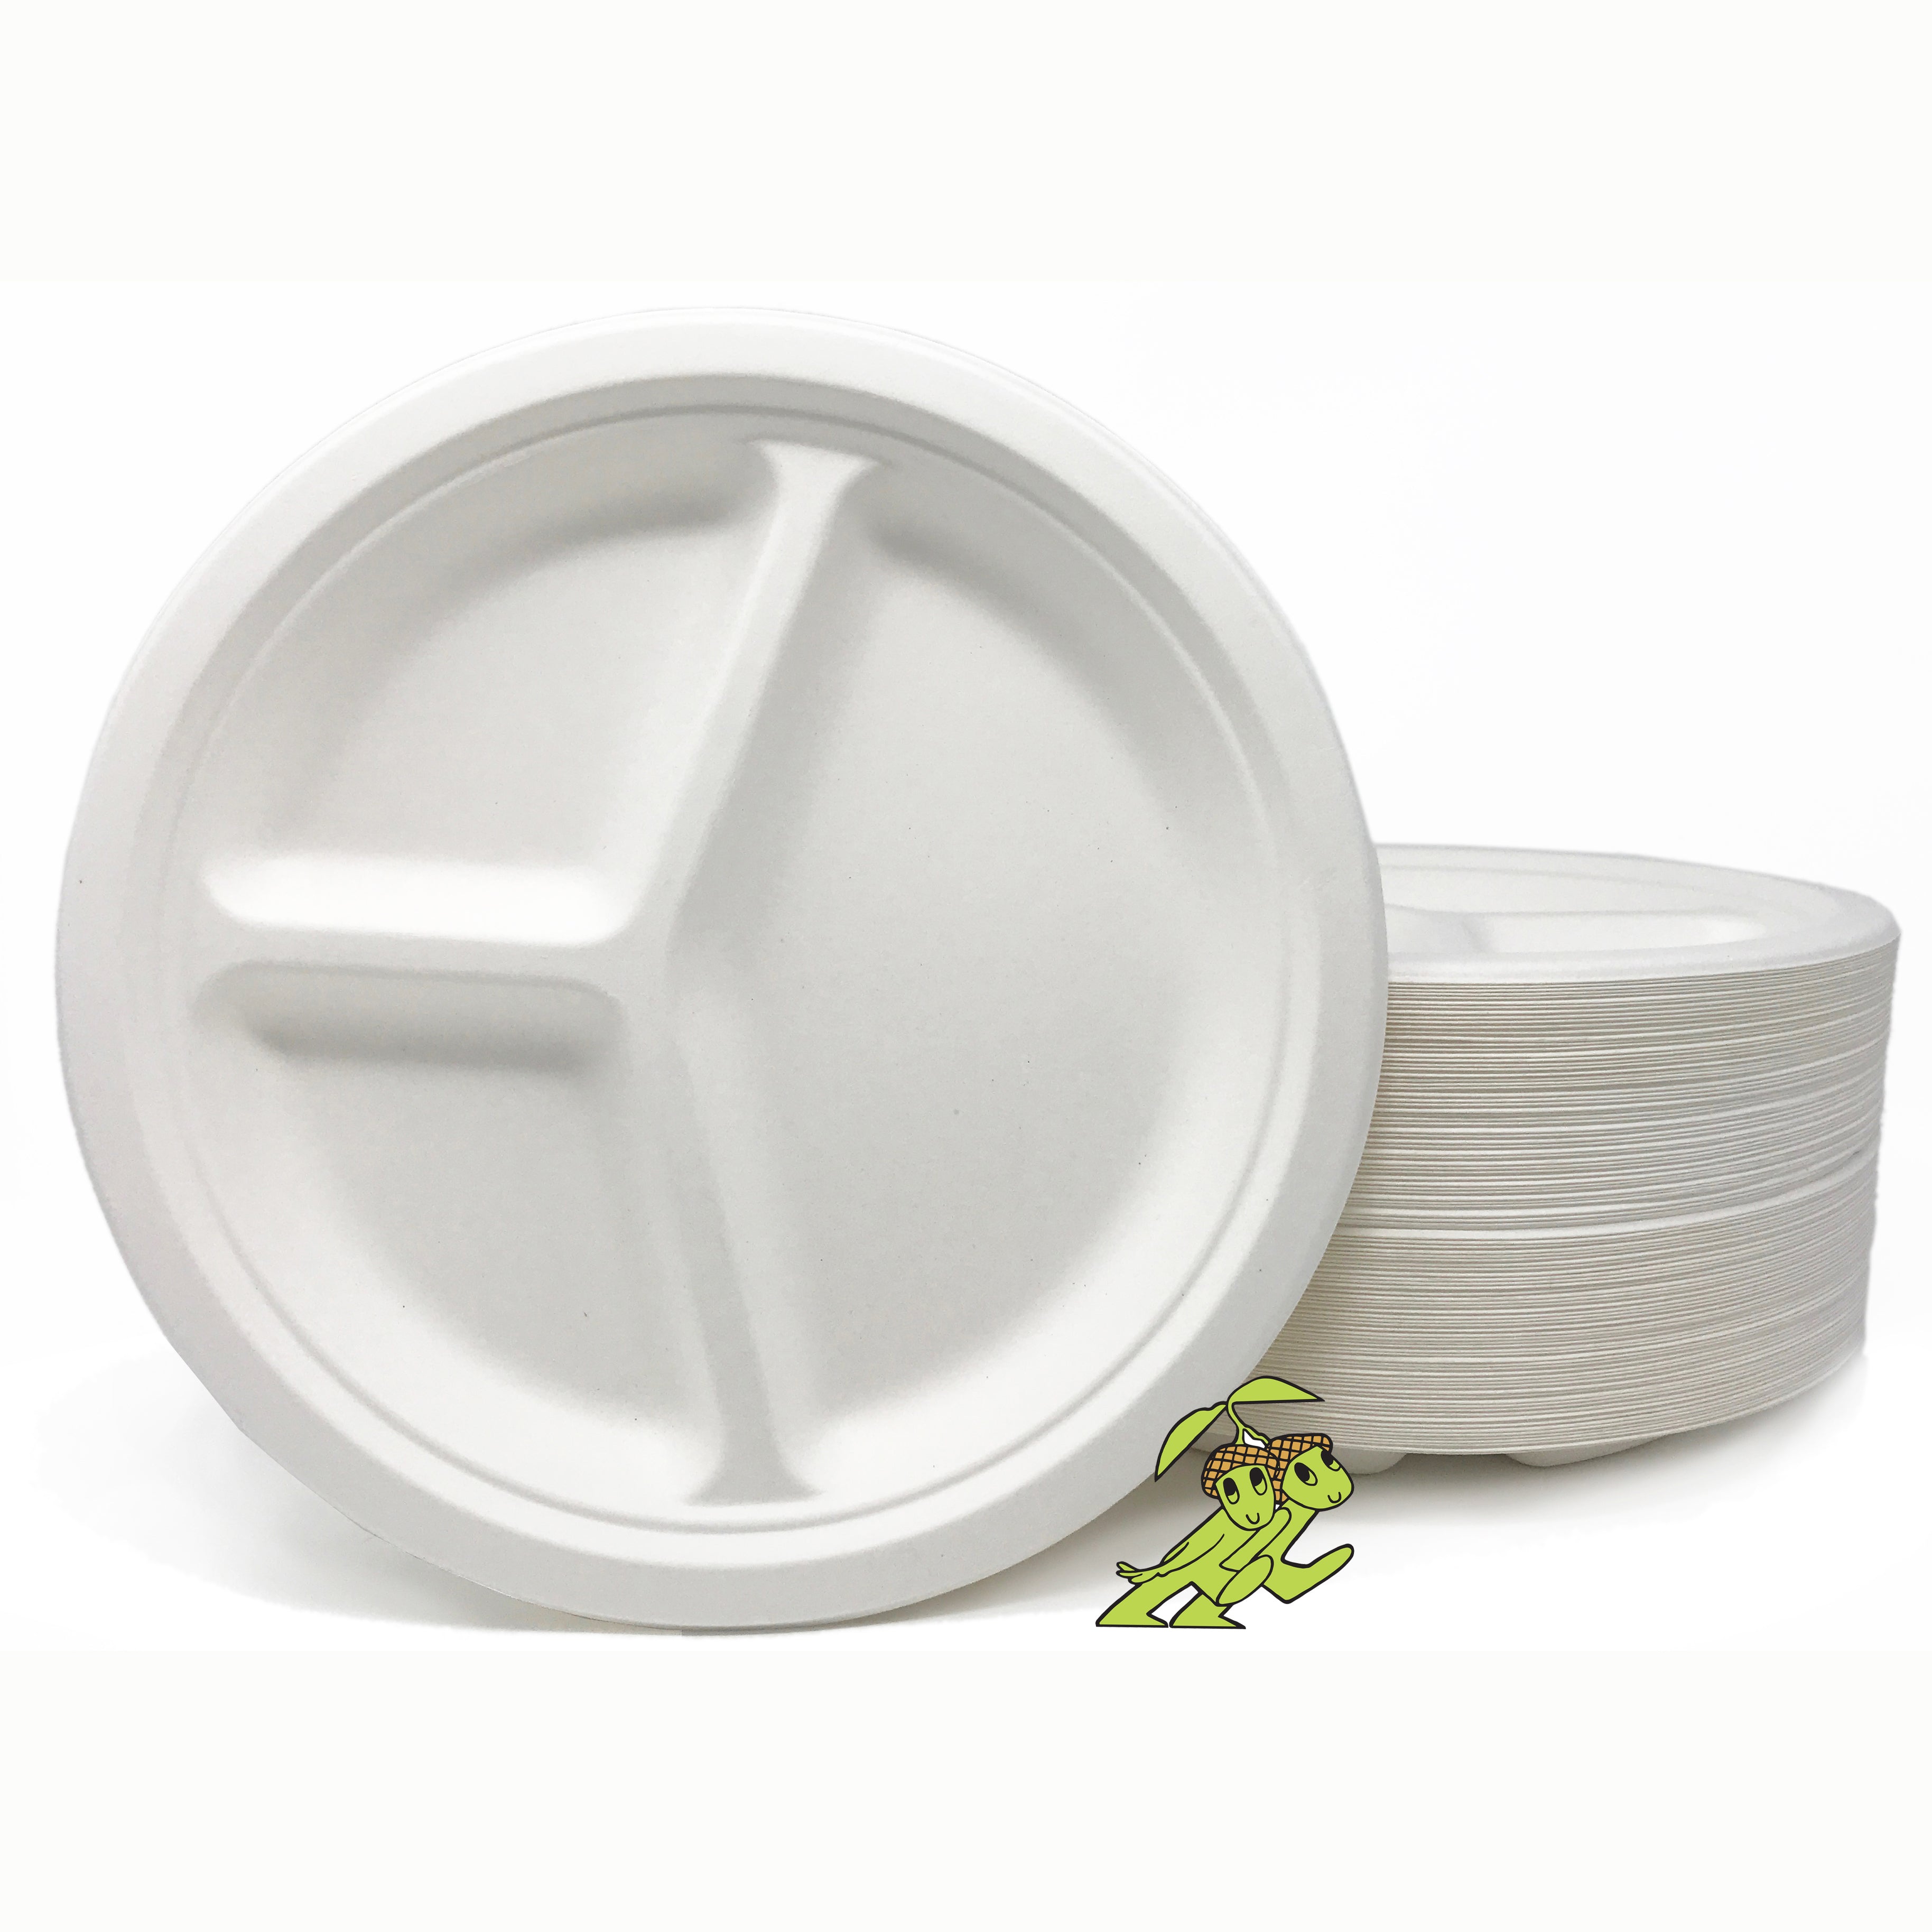 Plates, Bowls, To-Go Containers